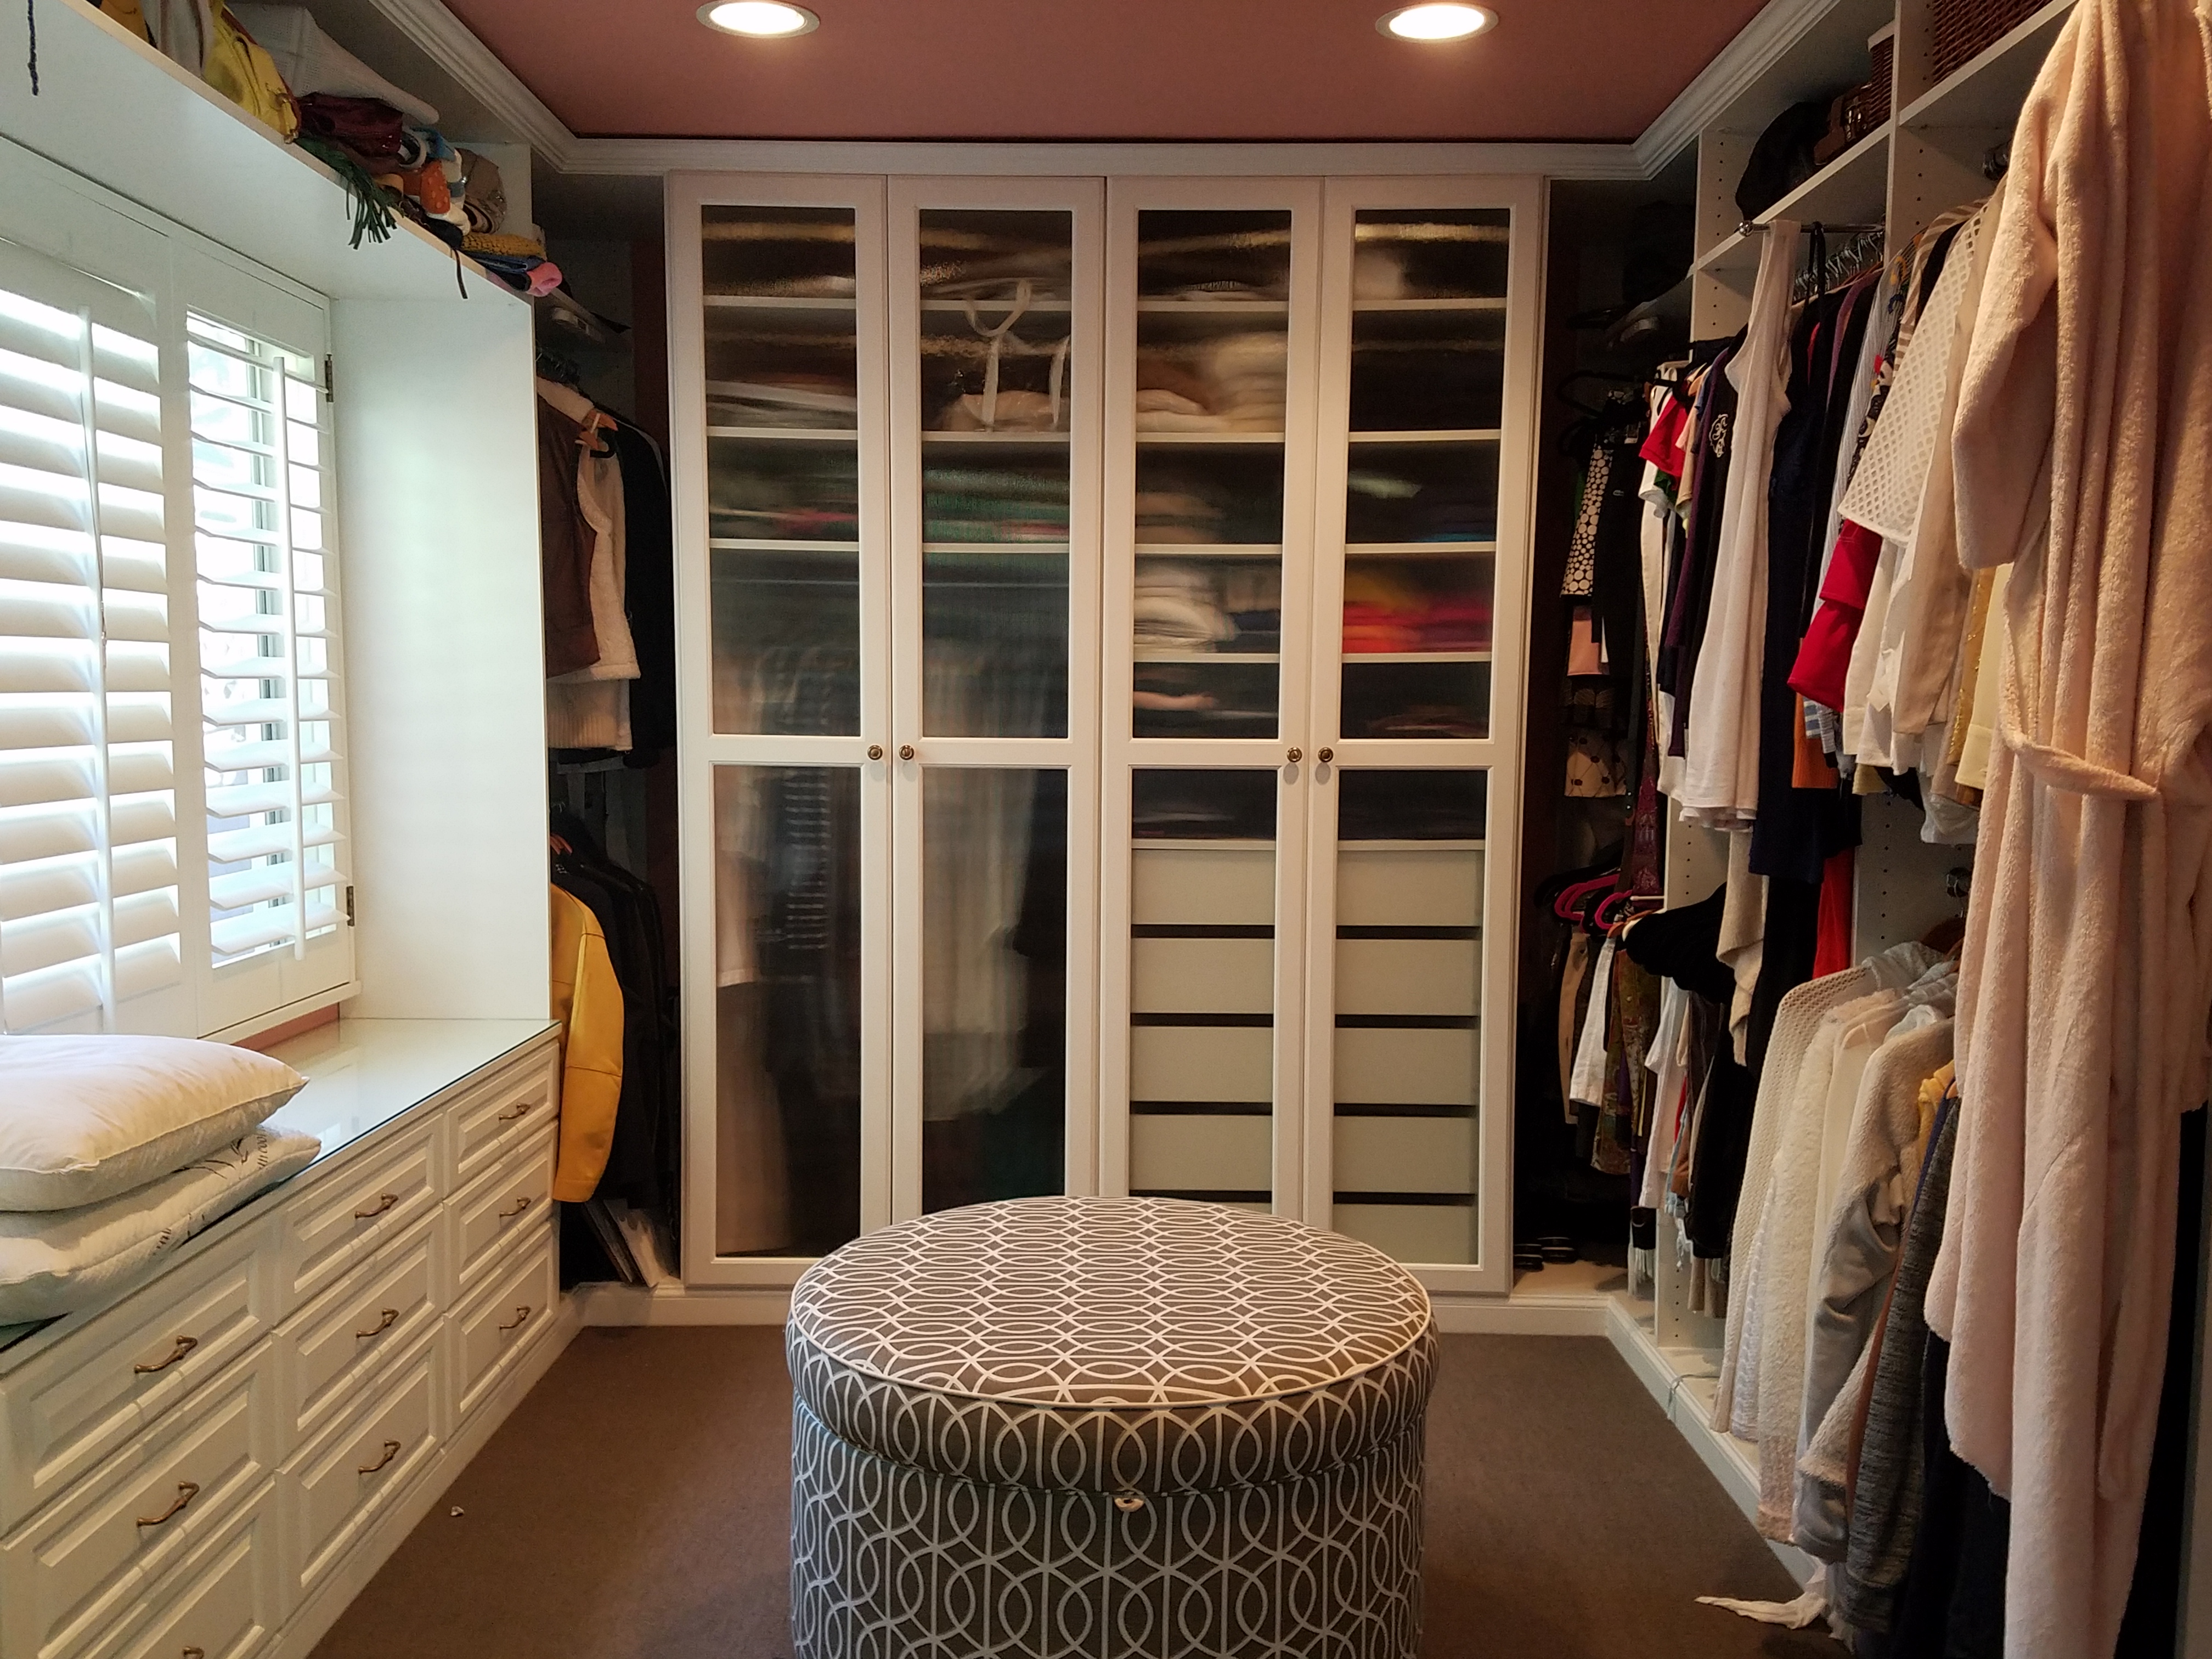 How To Pick the Best Closet Design - Featured Image